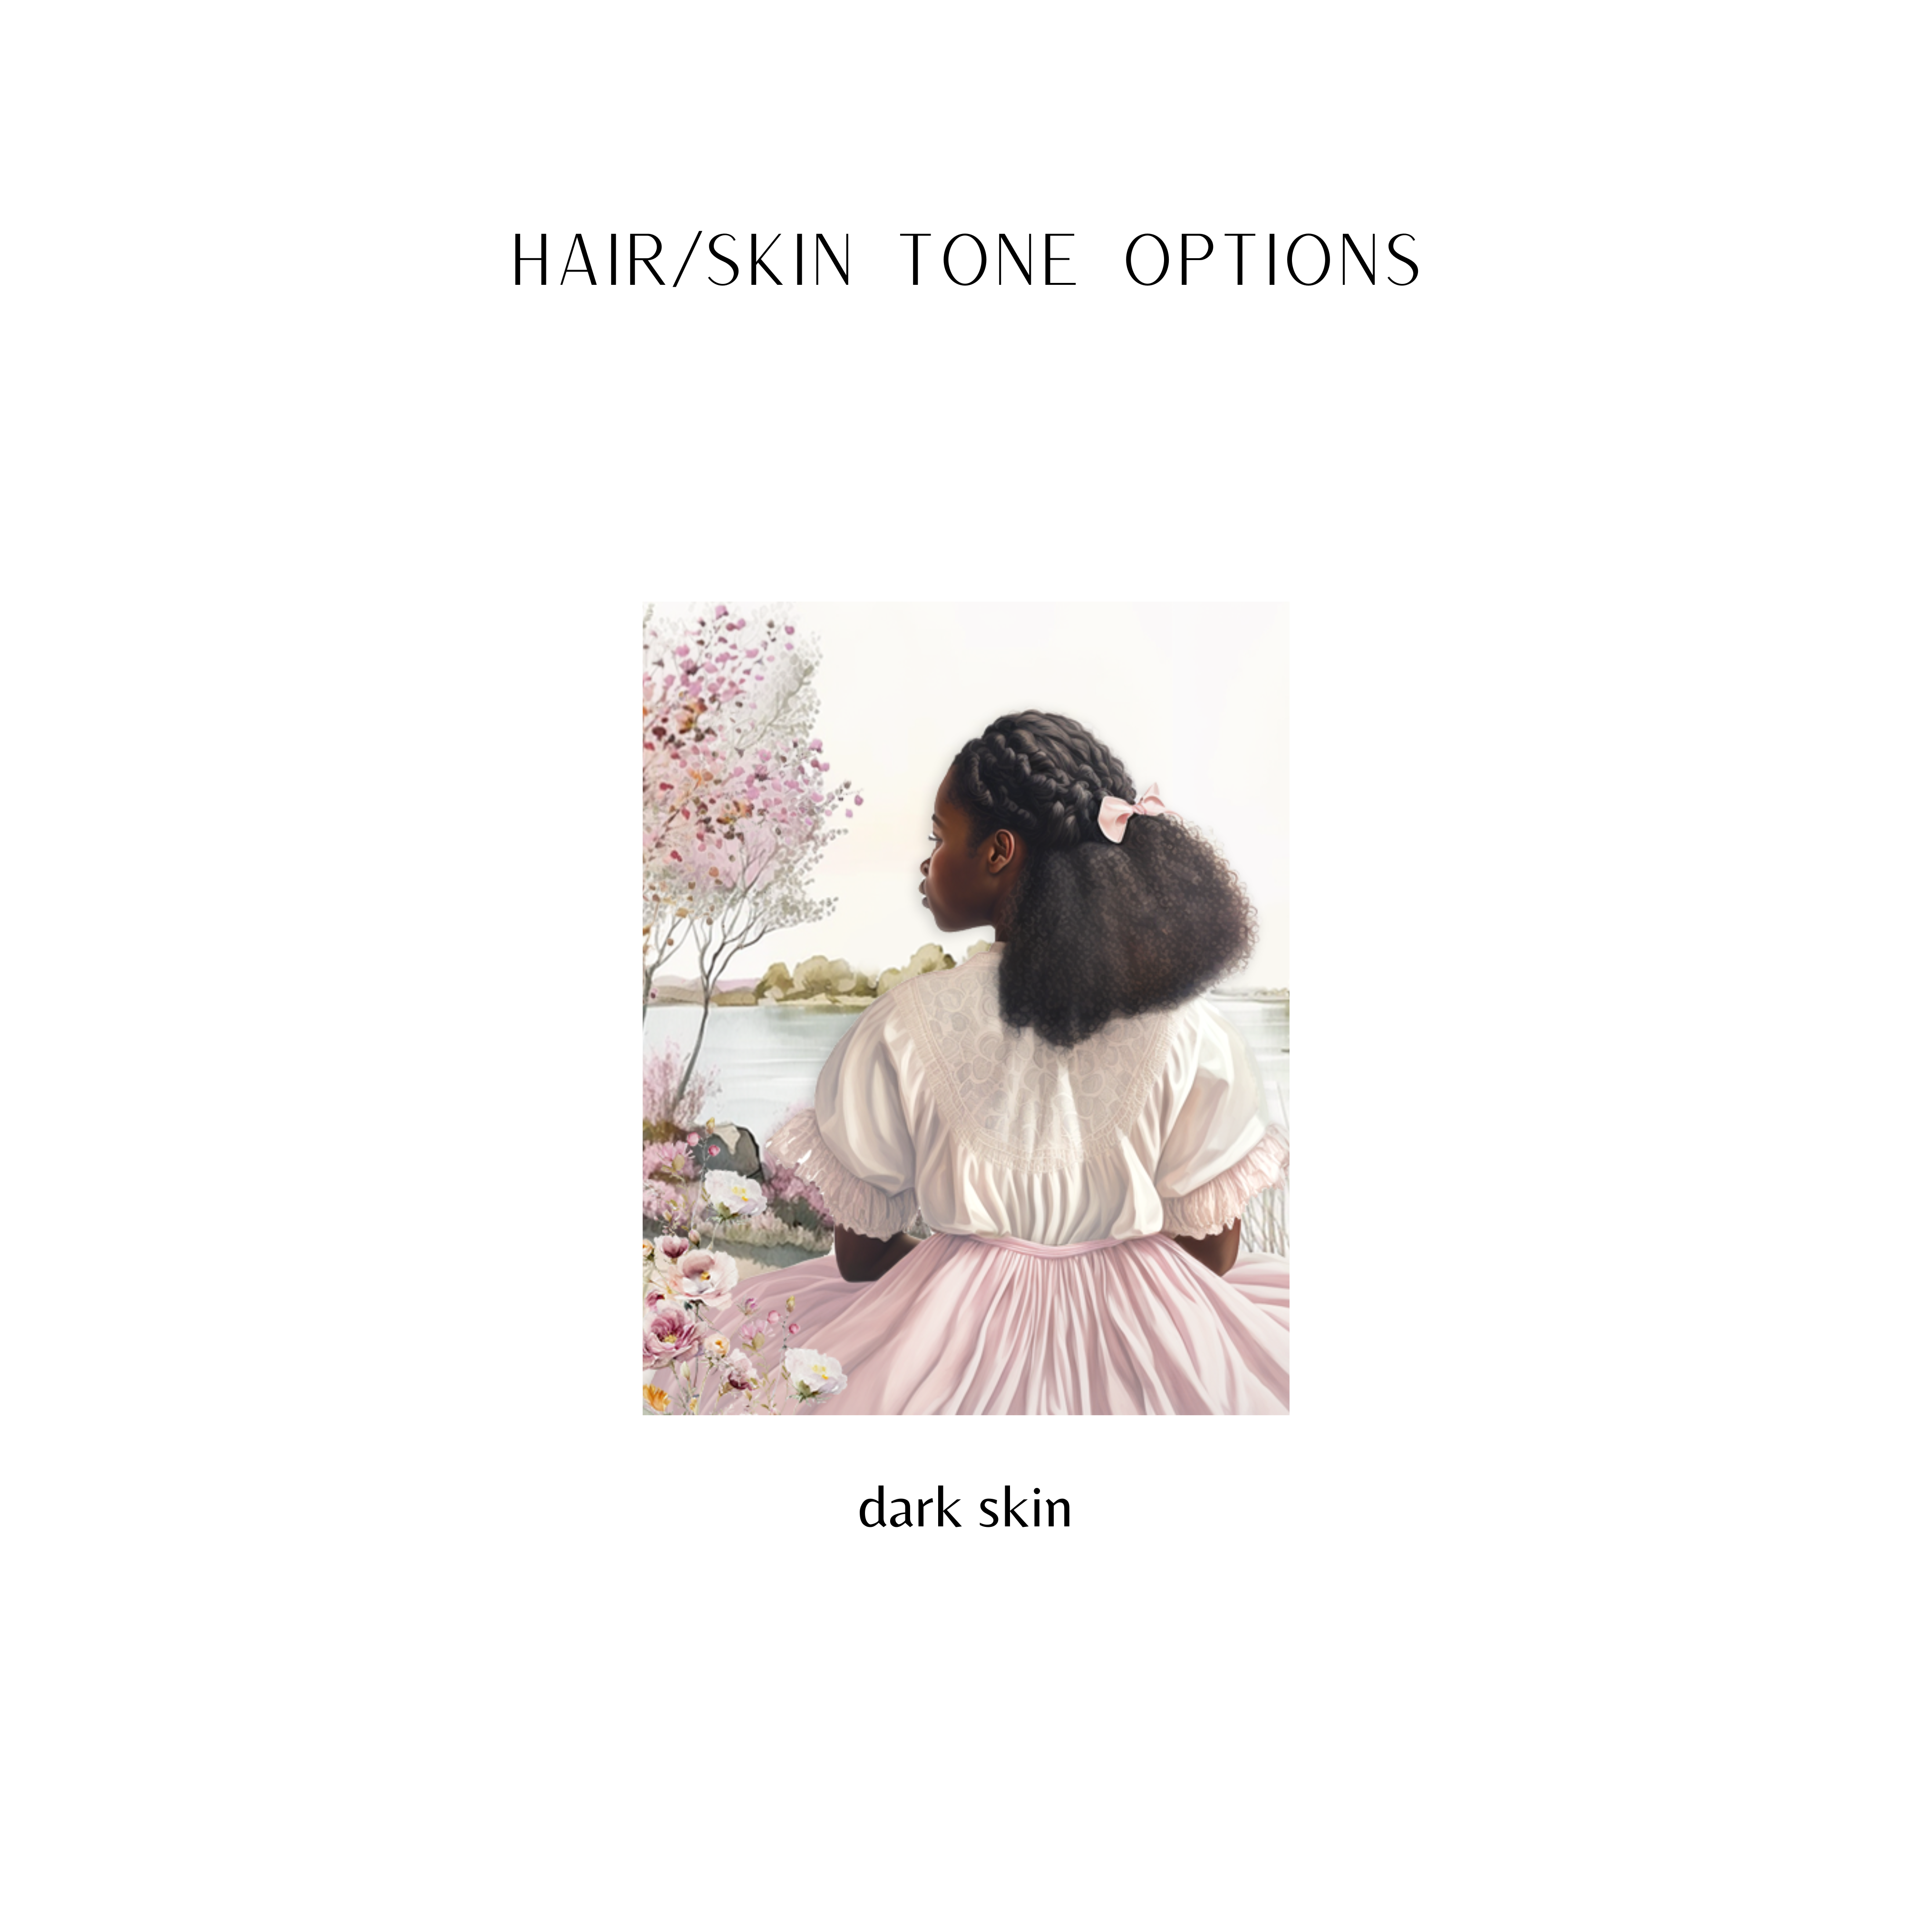 the cover of dark skin by hair / skin tone options